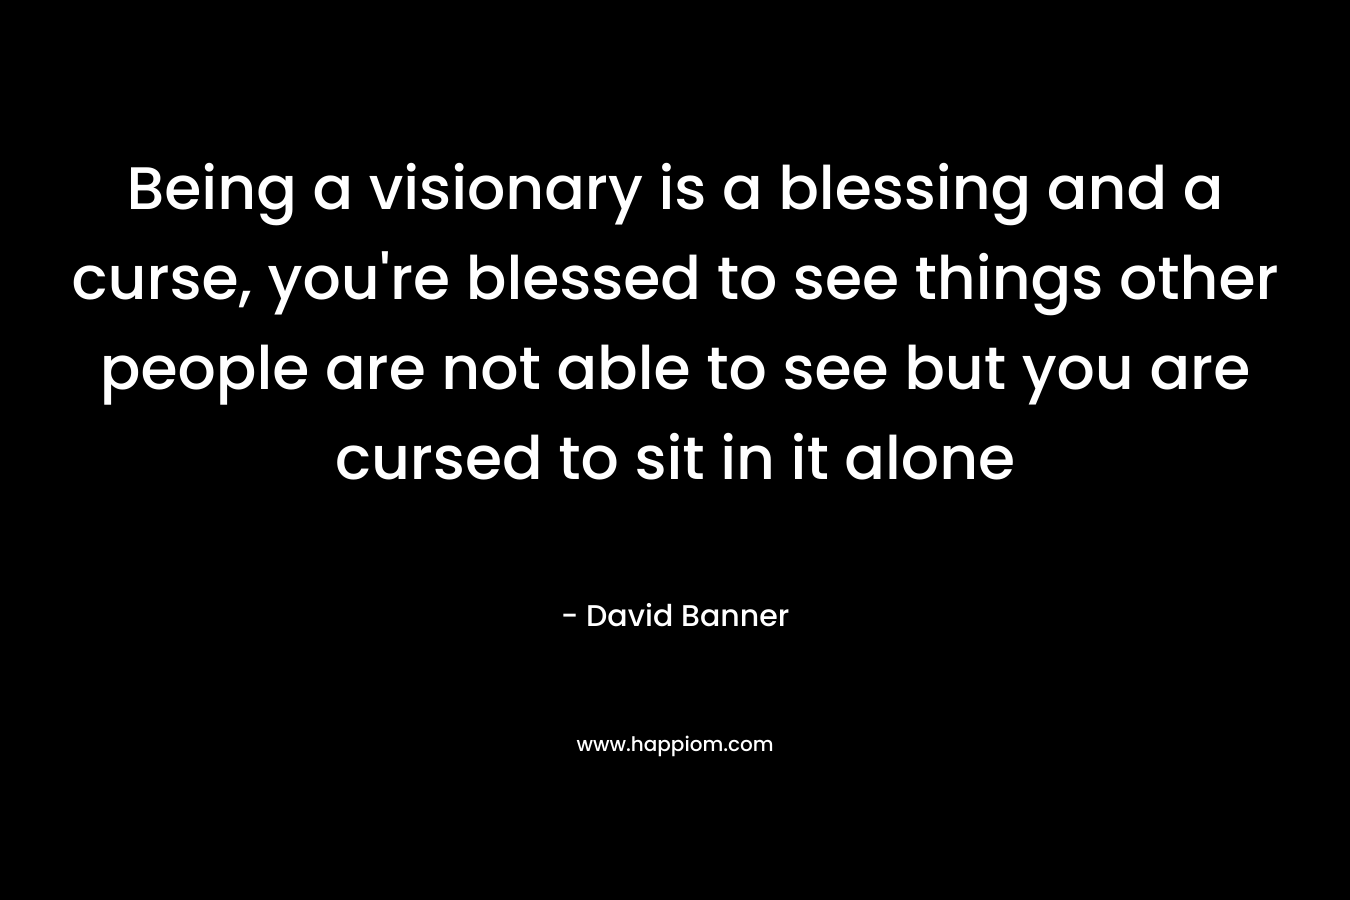 Being a visionary is a blessing and a curse, you're blessed to see things other people are not able to see but you are cursed to sit in it alone